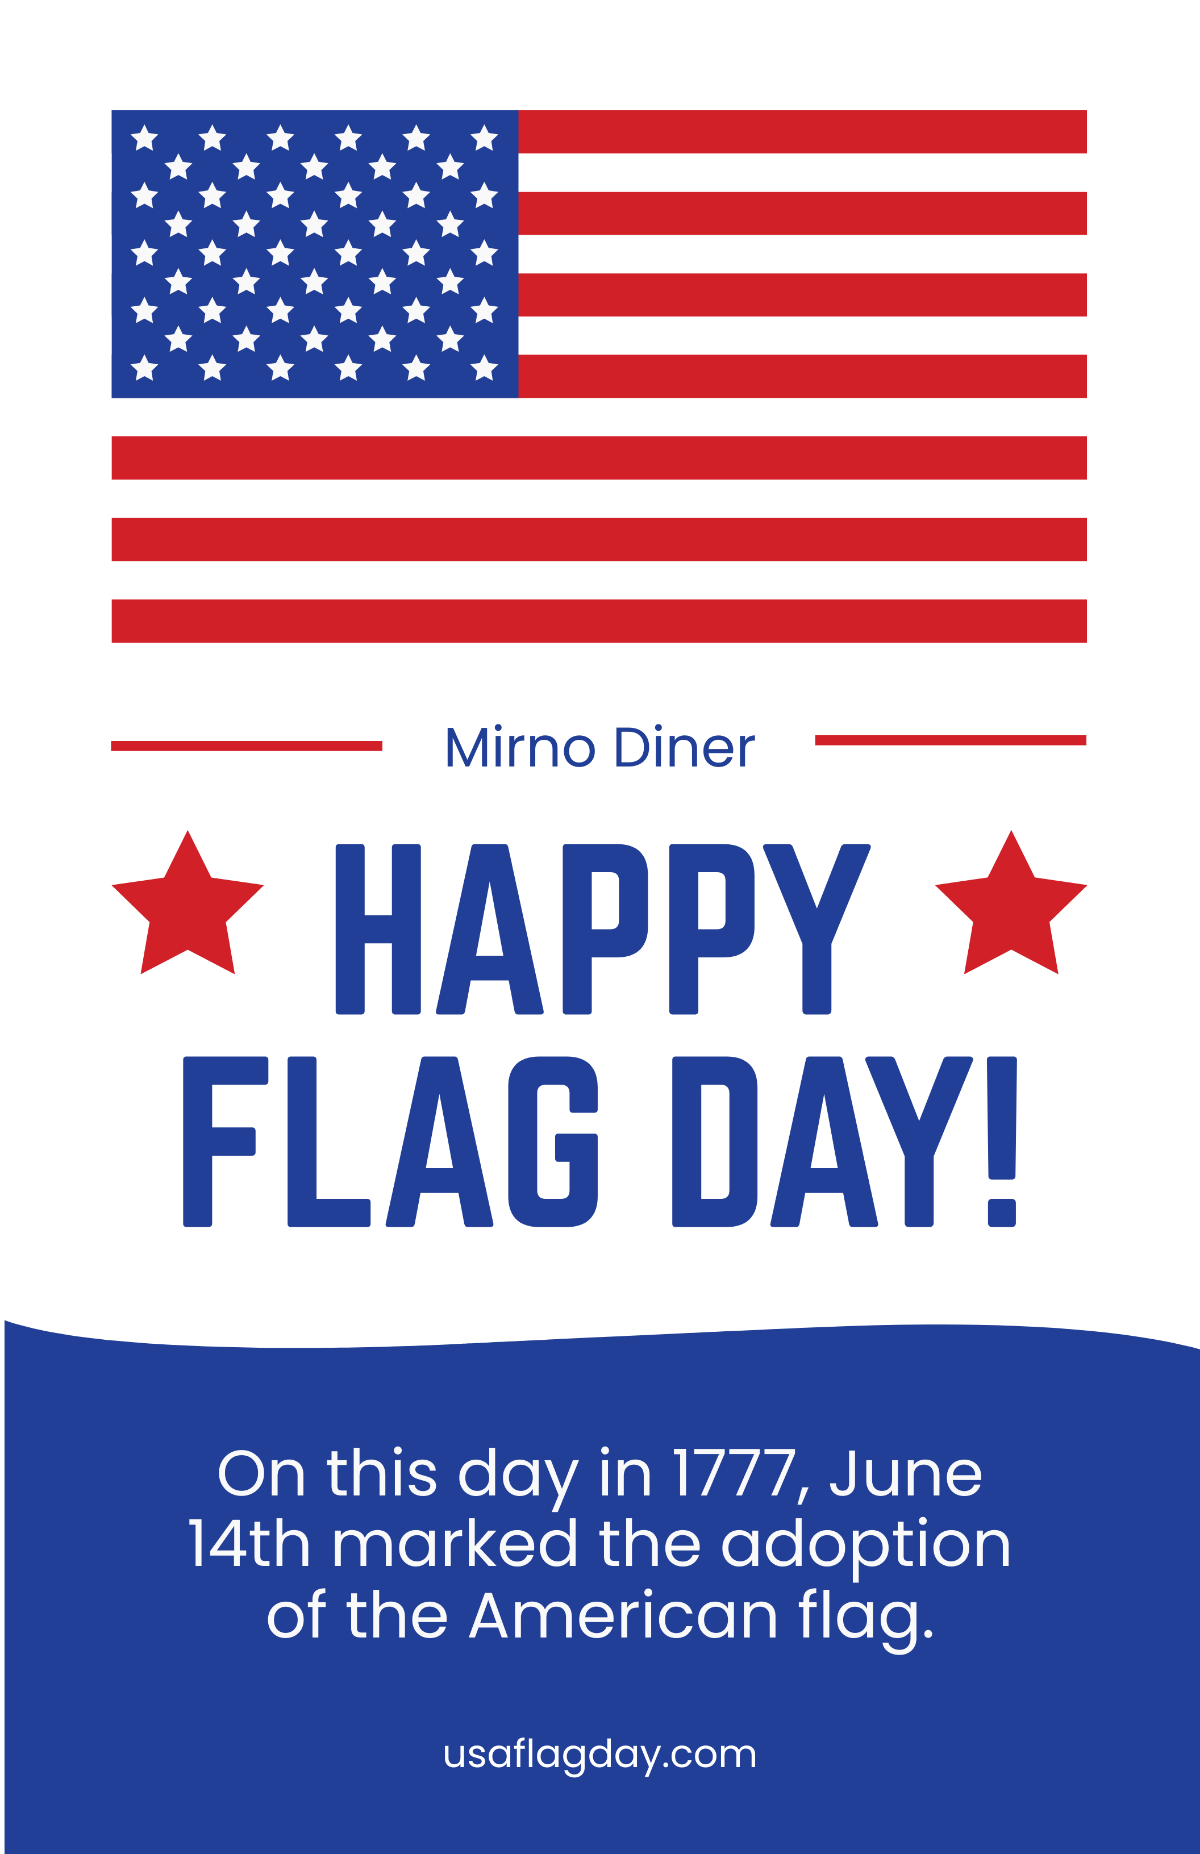 Free Happy Flag Day Poster Template